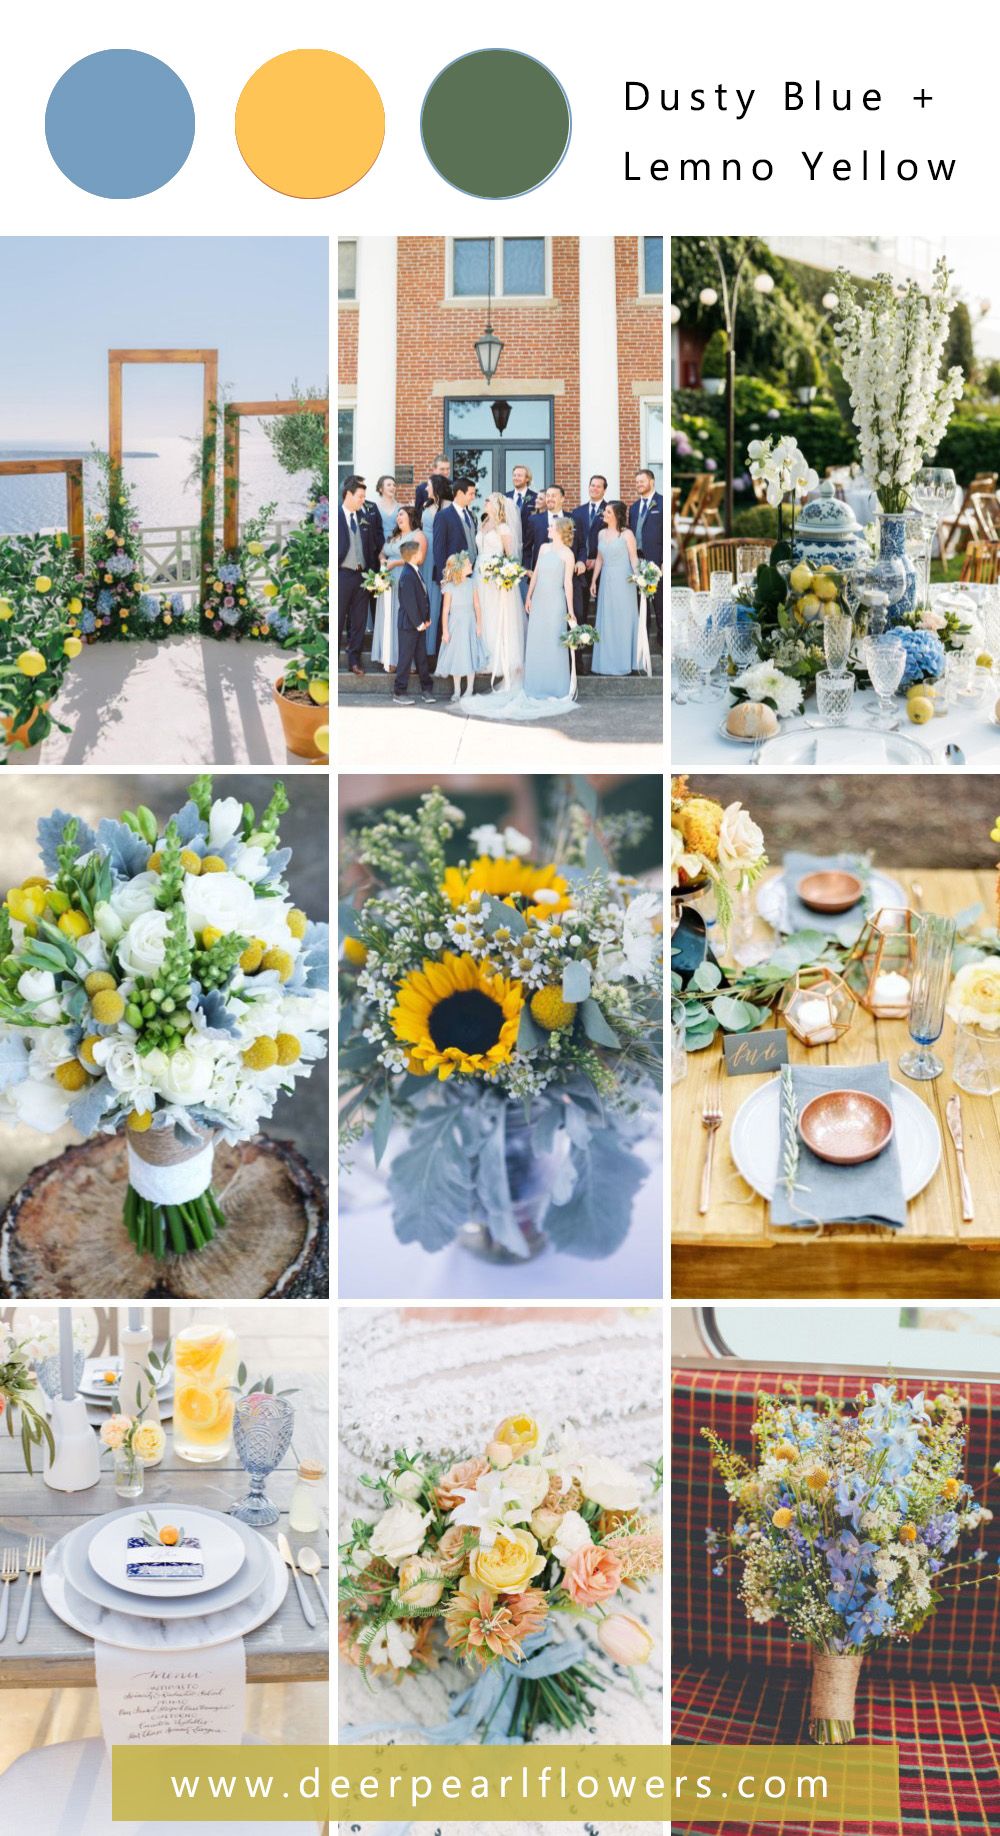 Dusty blue and lemon yellow wedding colors